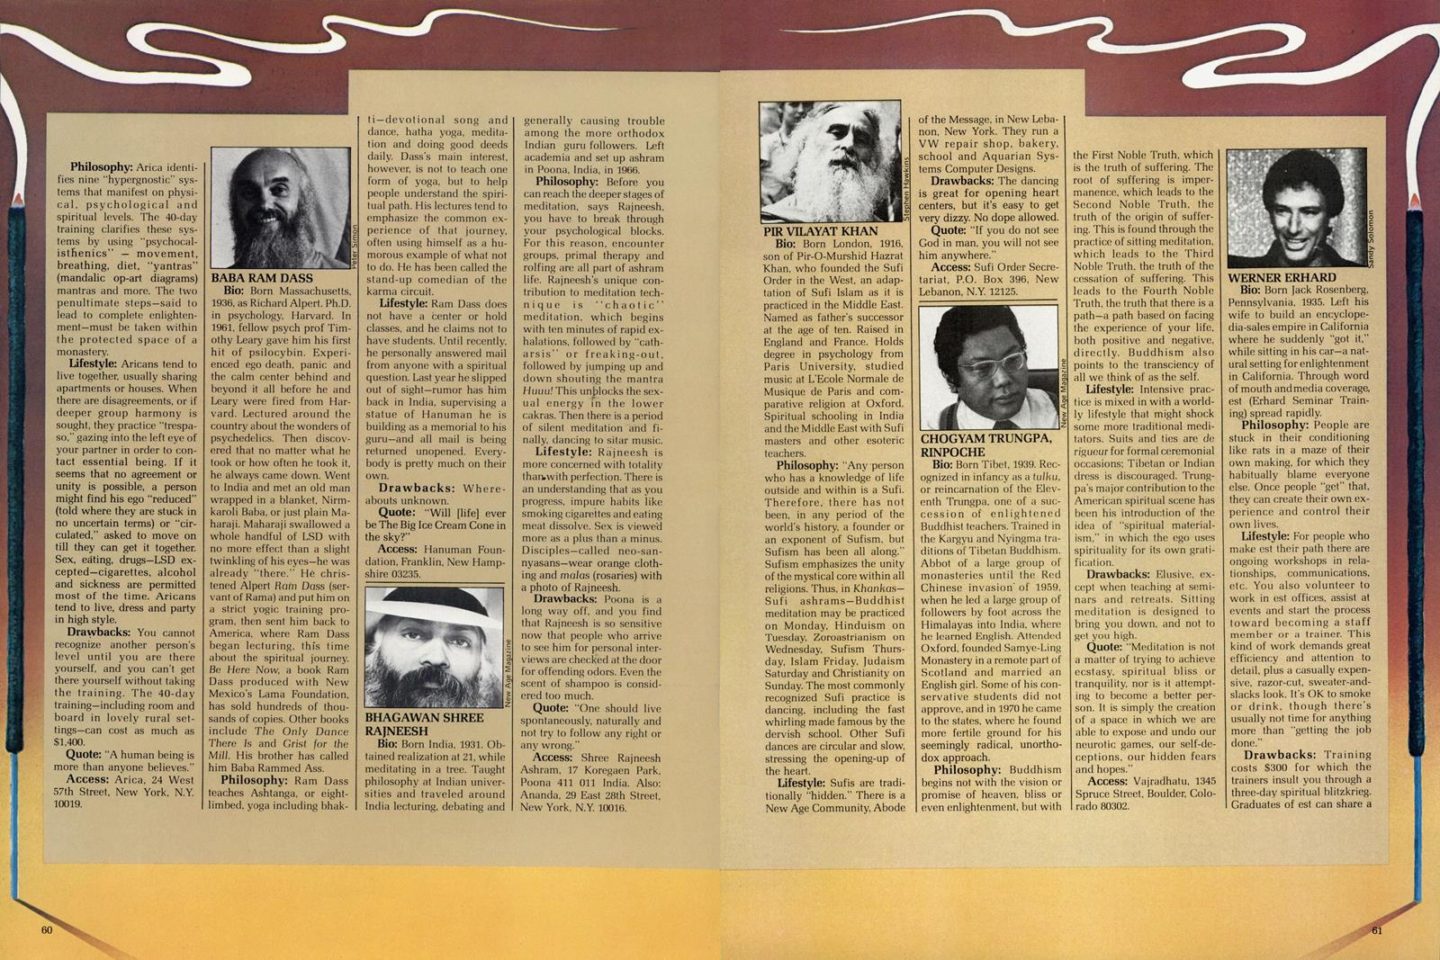 From the Archives: The High Times Guide to Gurus (1977)